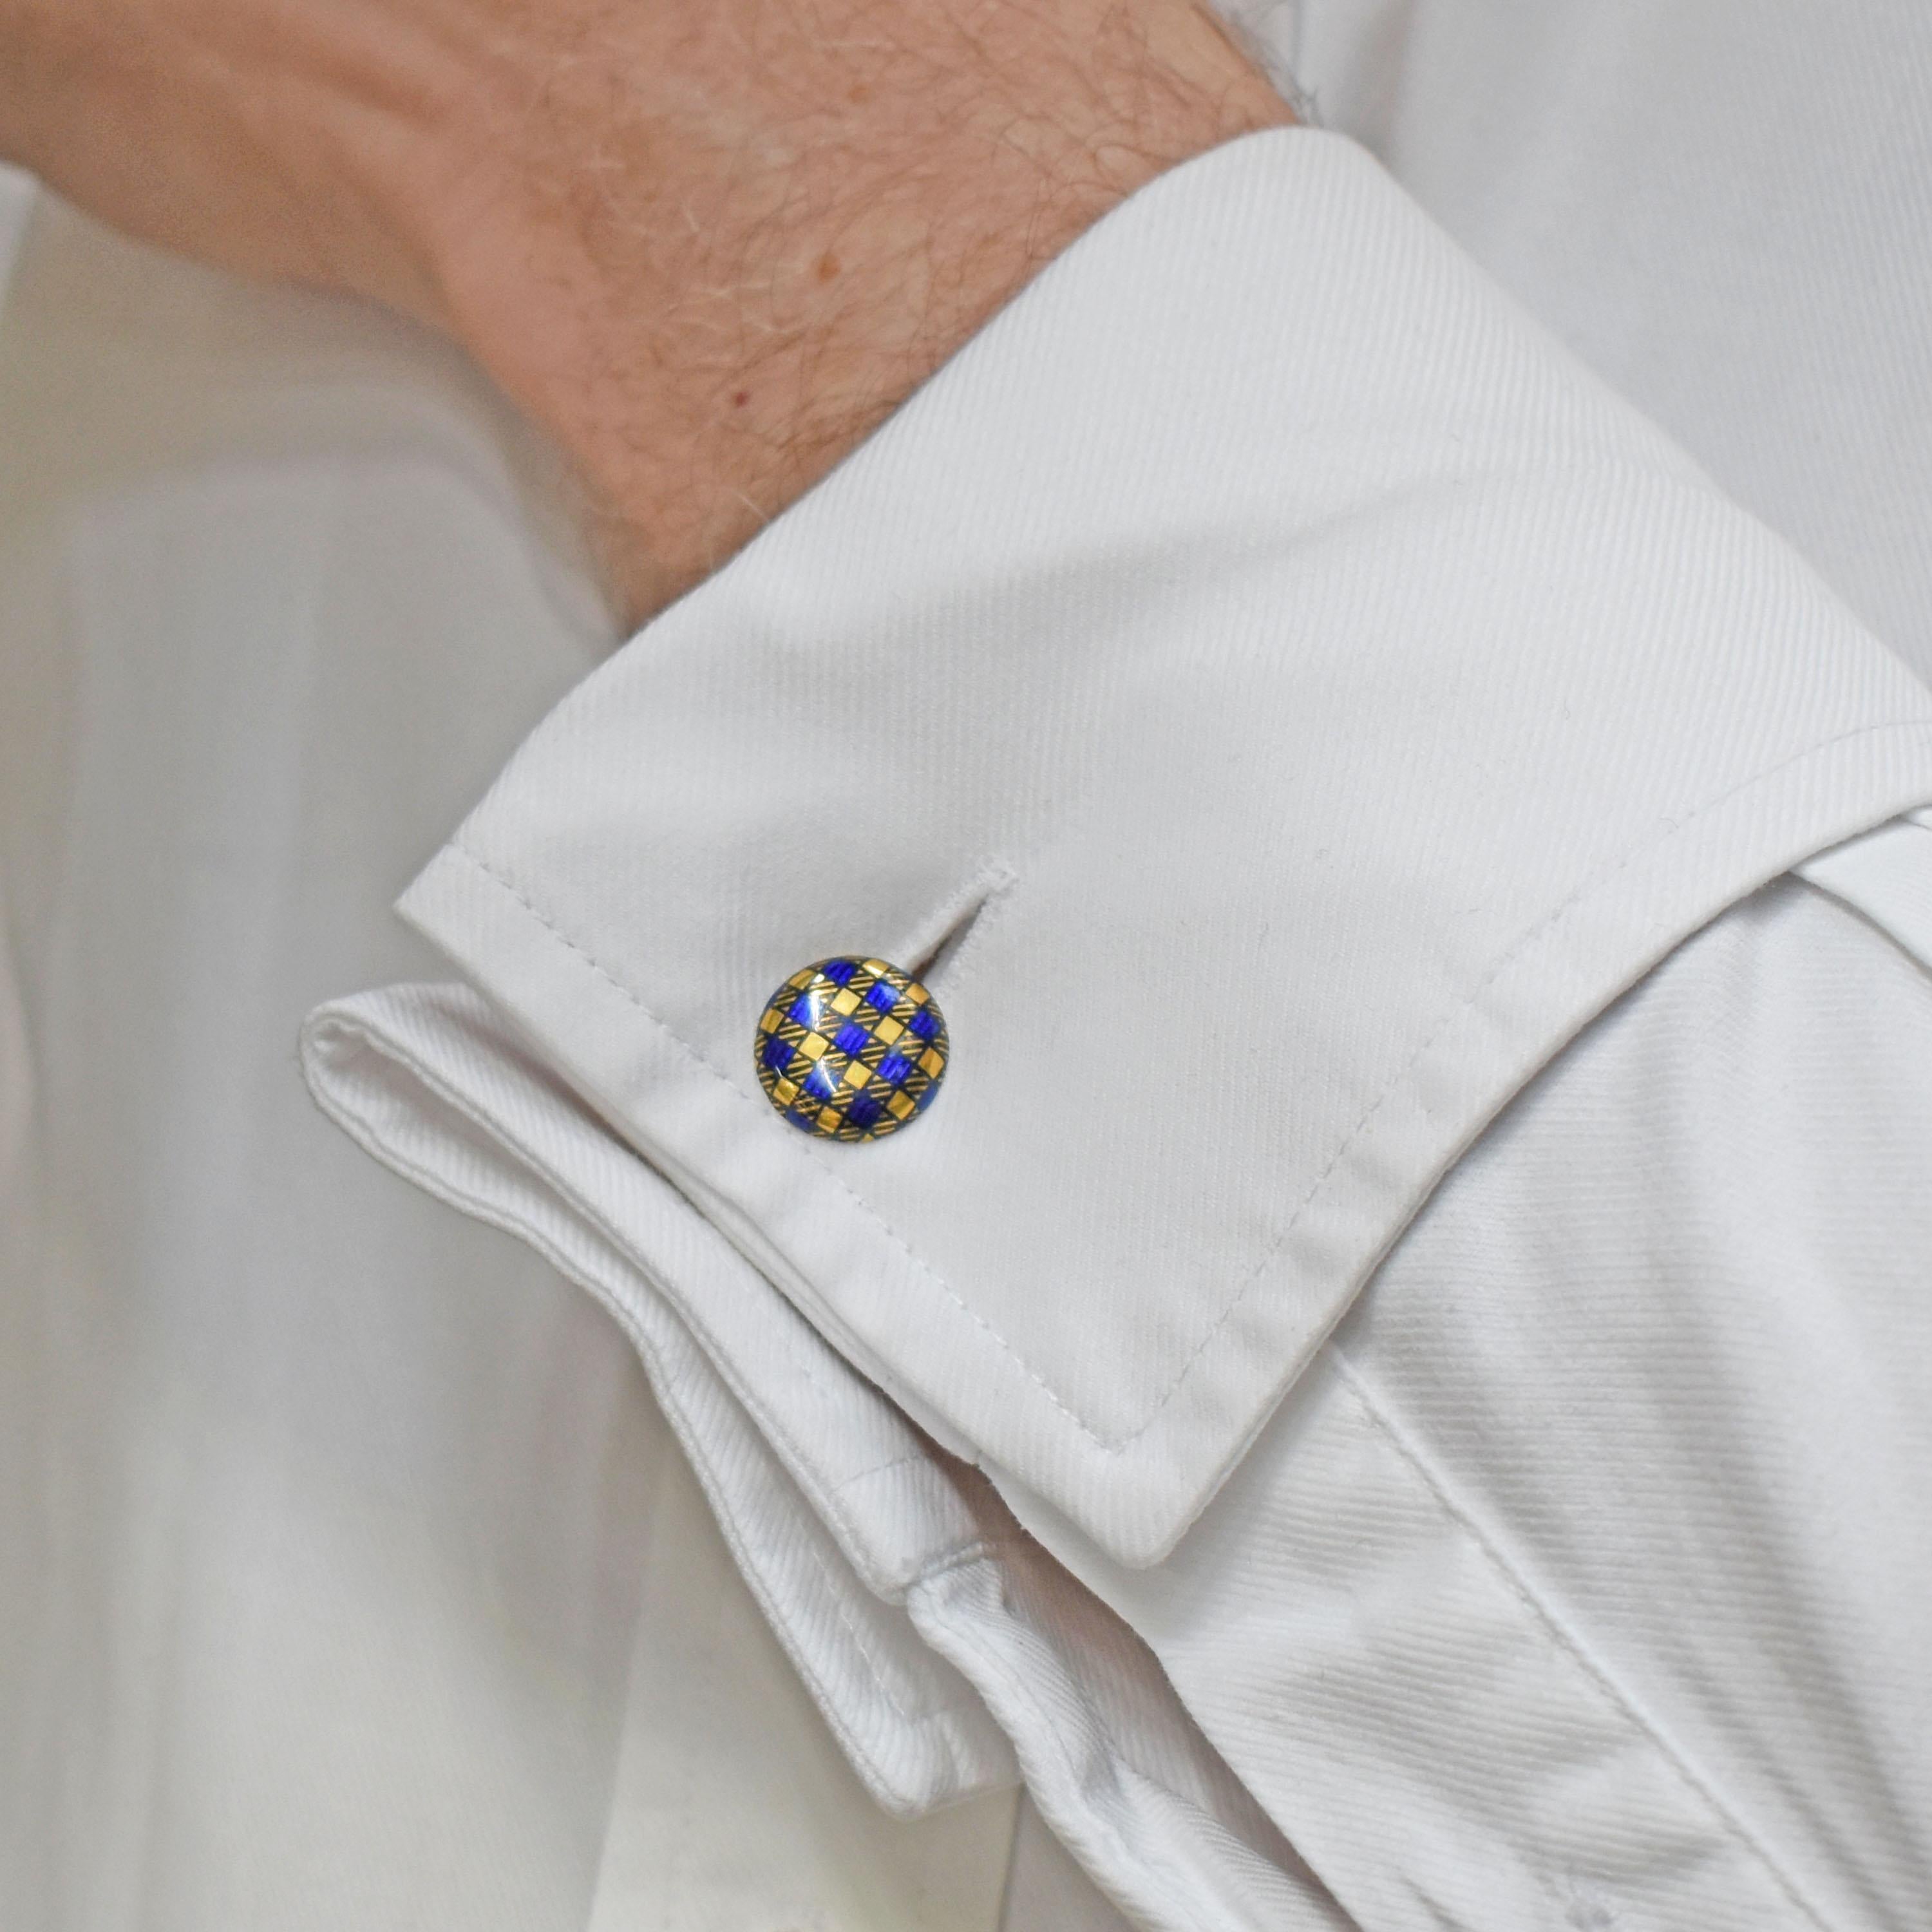 A vintage tartan enamel dress-set, comprising a pair of cufflinks, three buttons and a tie pin, designed with a blue enamel pattern representing tartan, on 14ct gold, with markers marks J.B., mid 20th Century.

The cufflinks and tie pin diameter